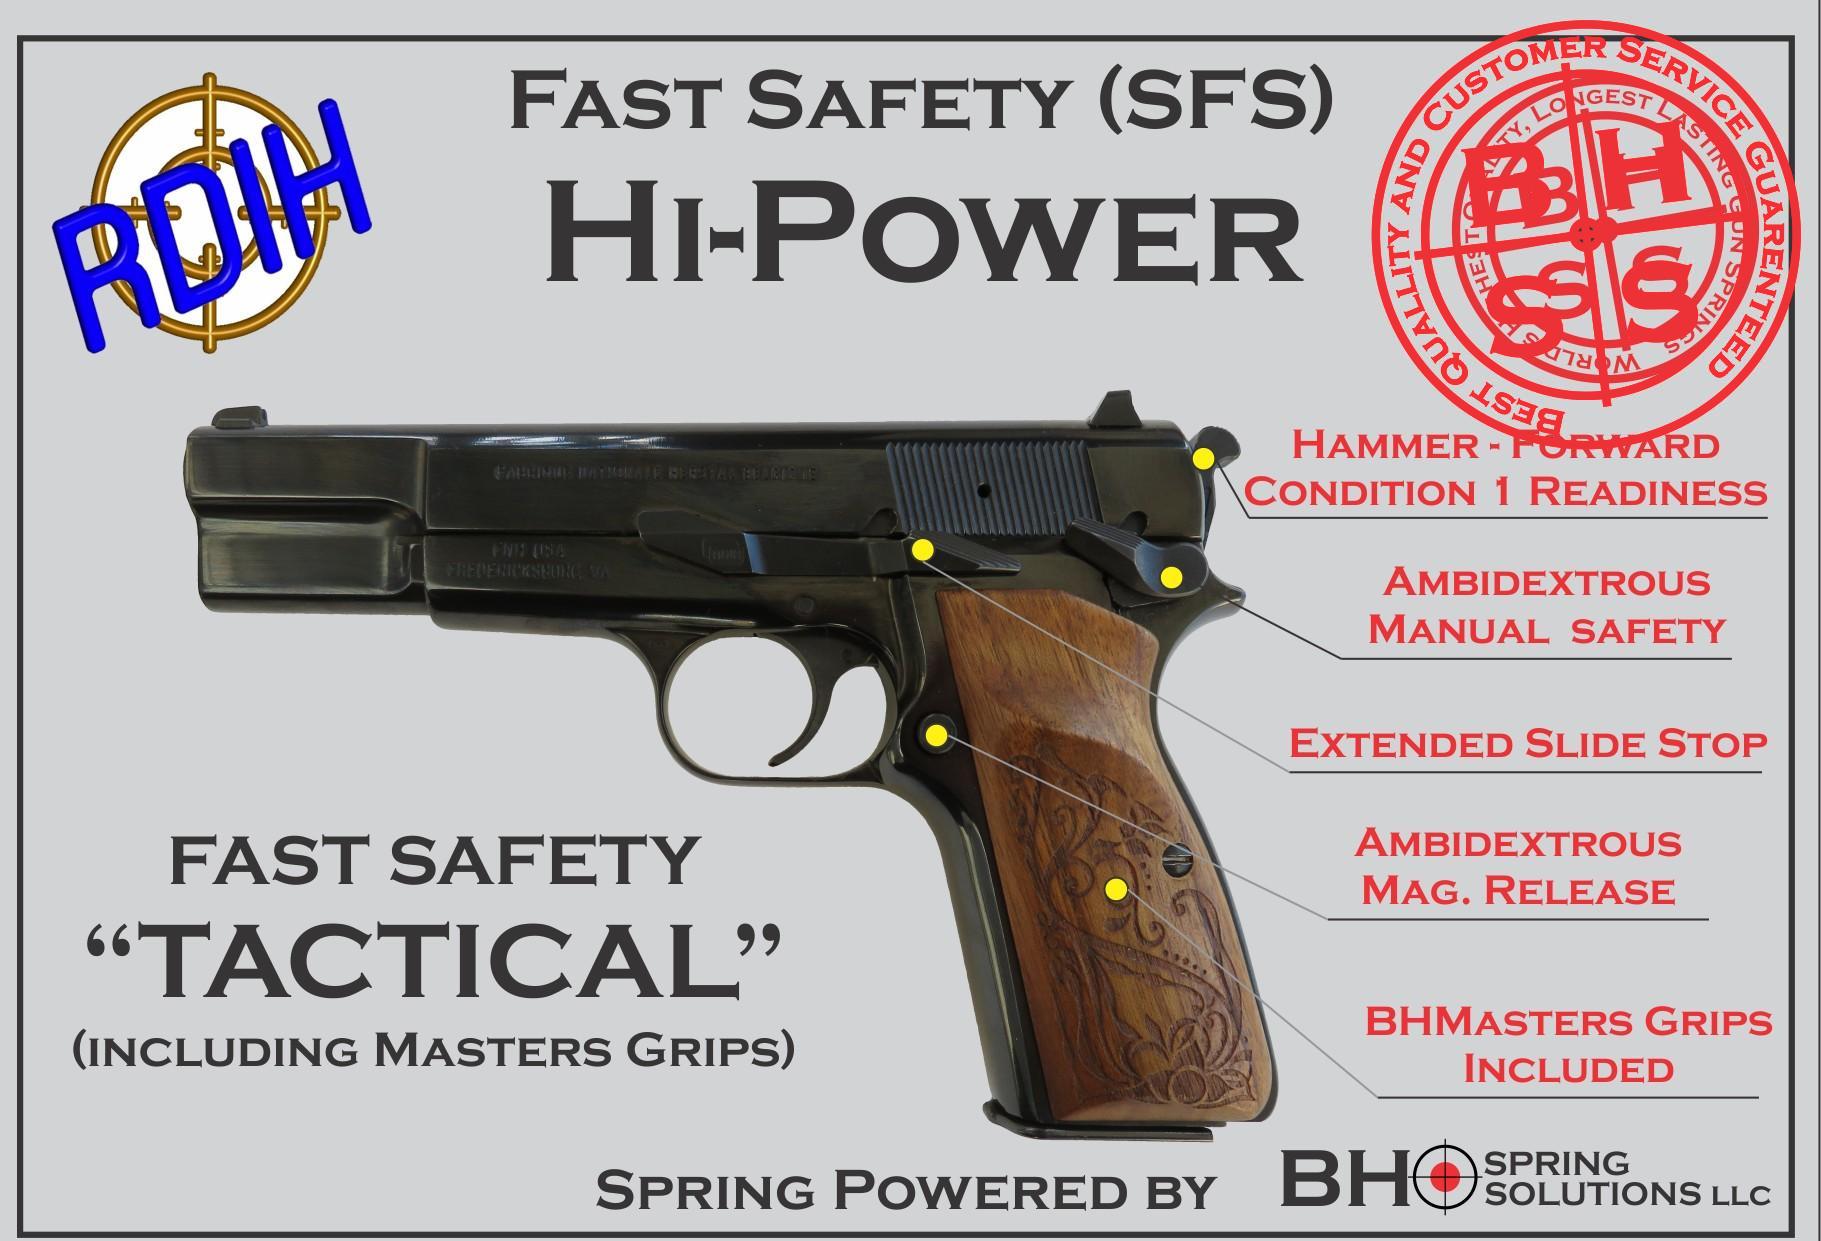 Fast Safety (SFS v2.0) "Tactical" for Hi-Power, BHSpring Kit, Masters Grips